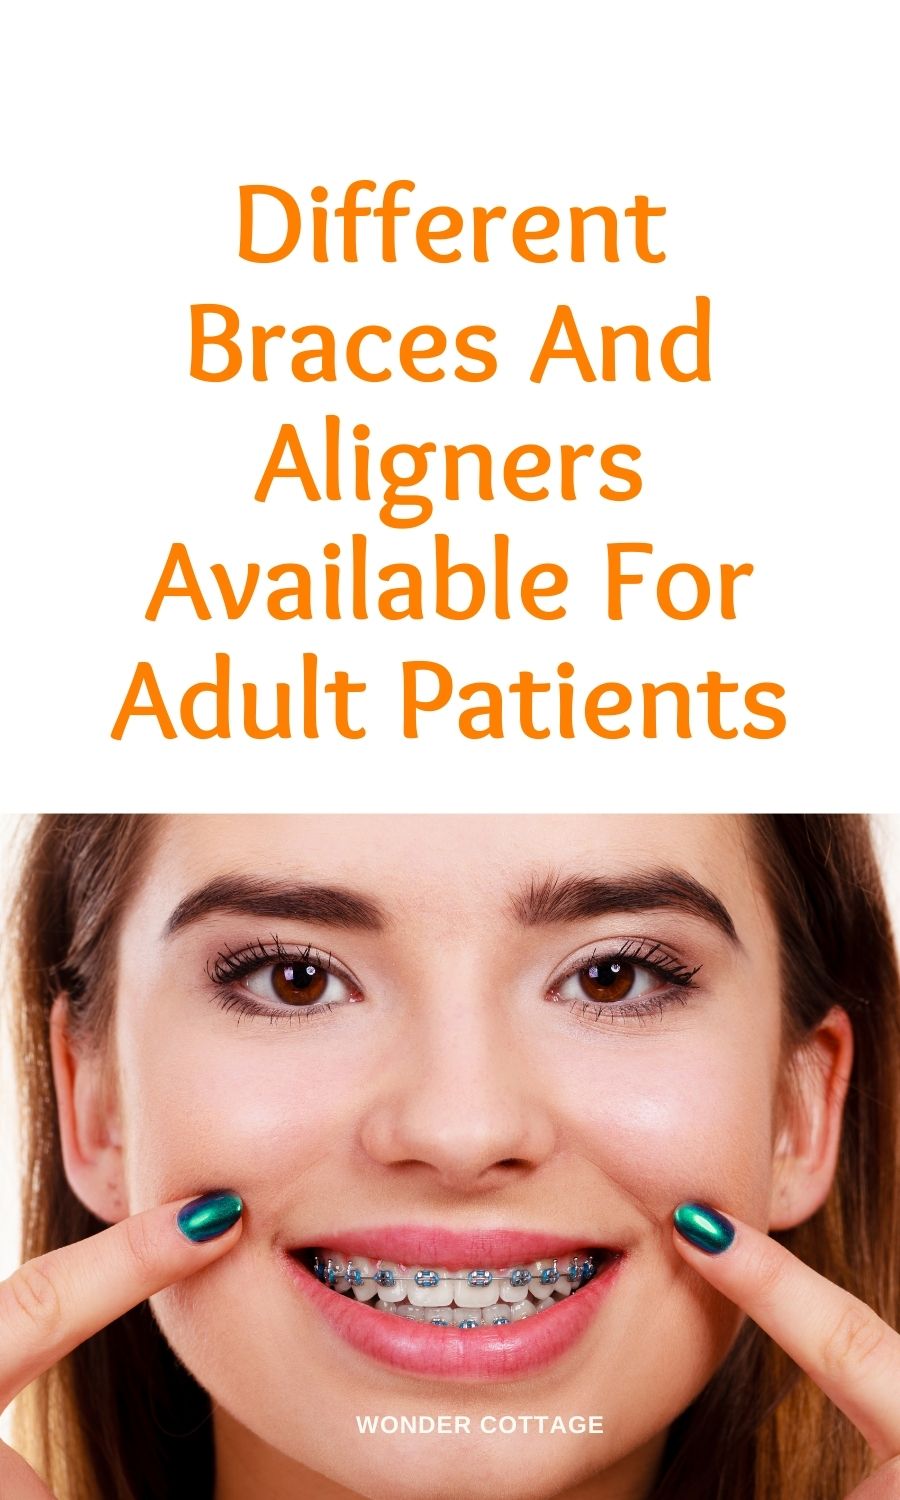 Different Braces And Aligners Available For Adult Patients